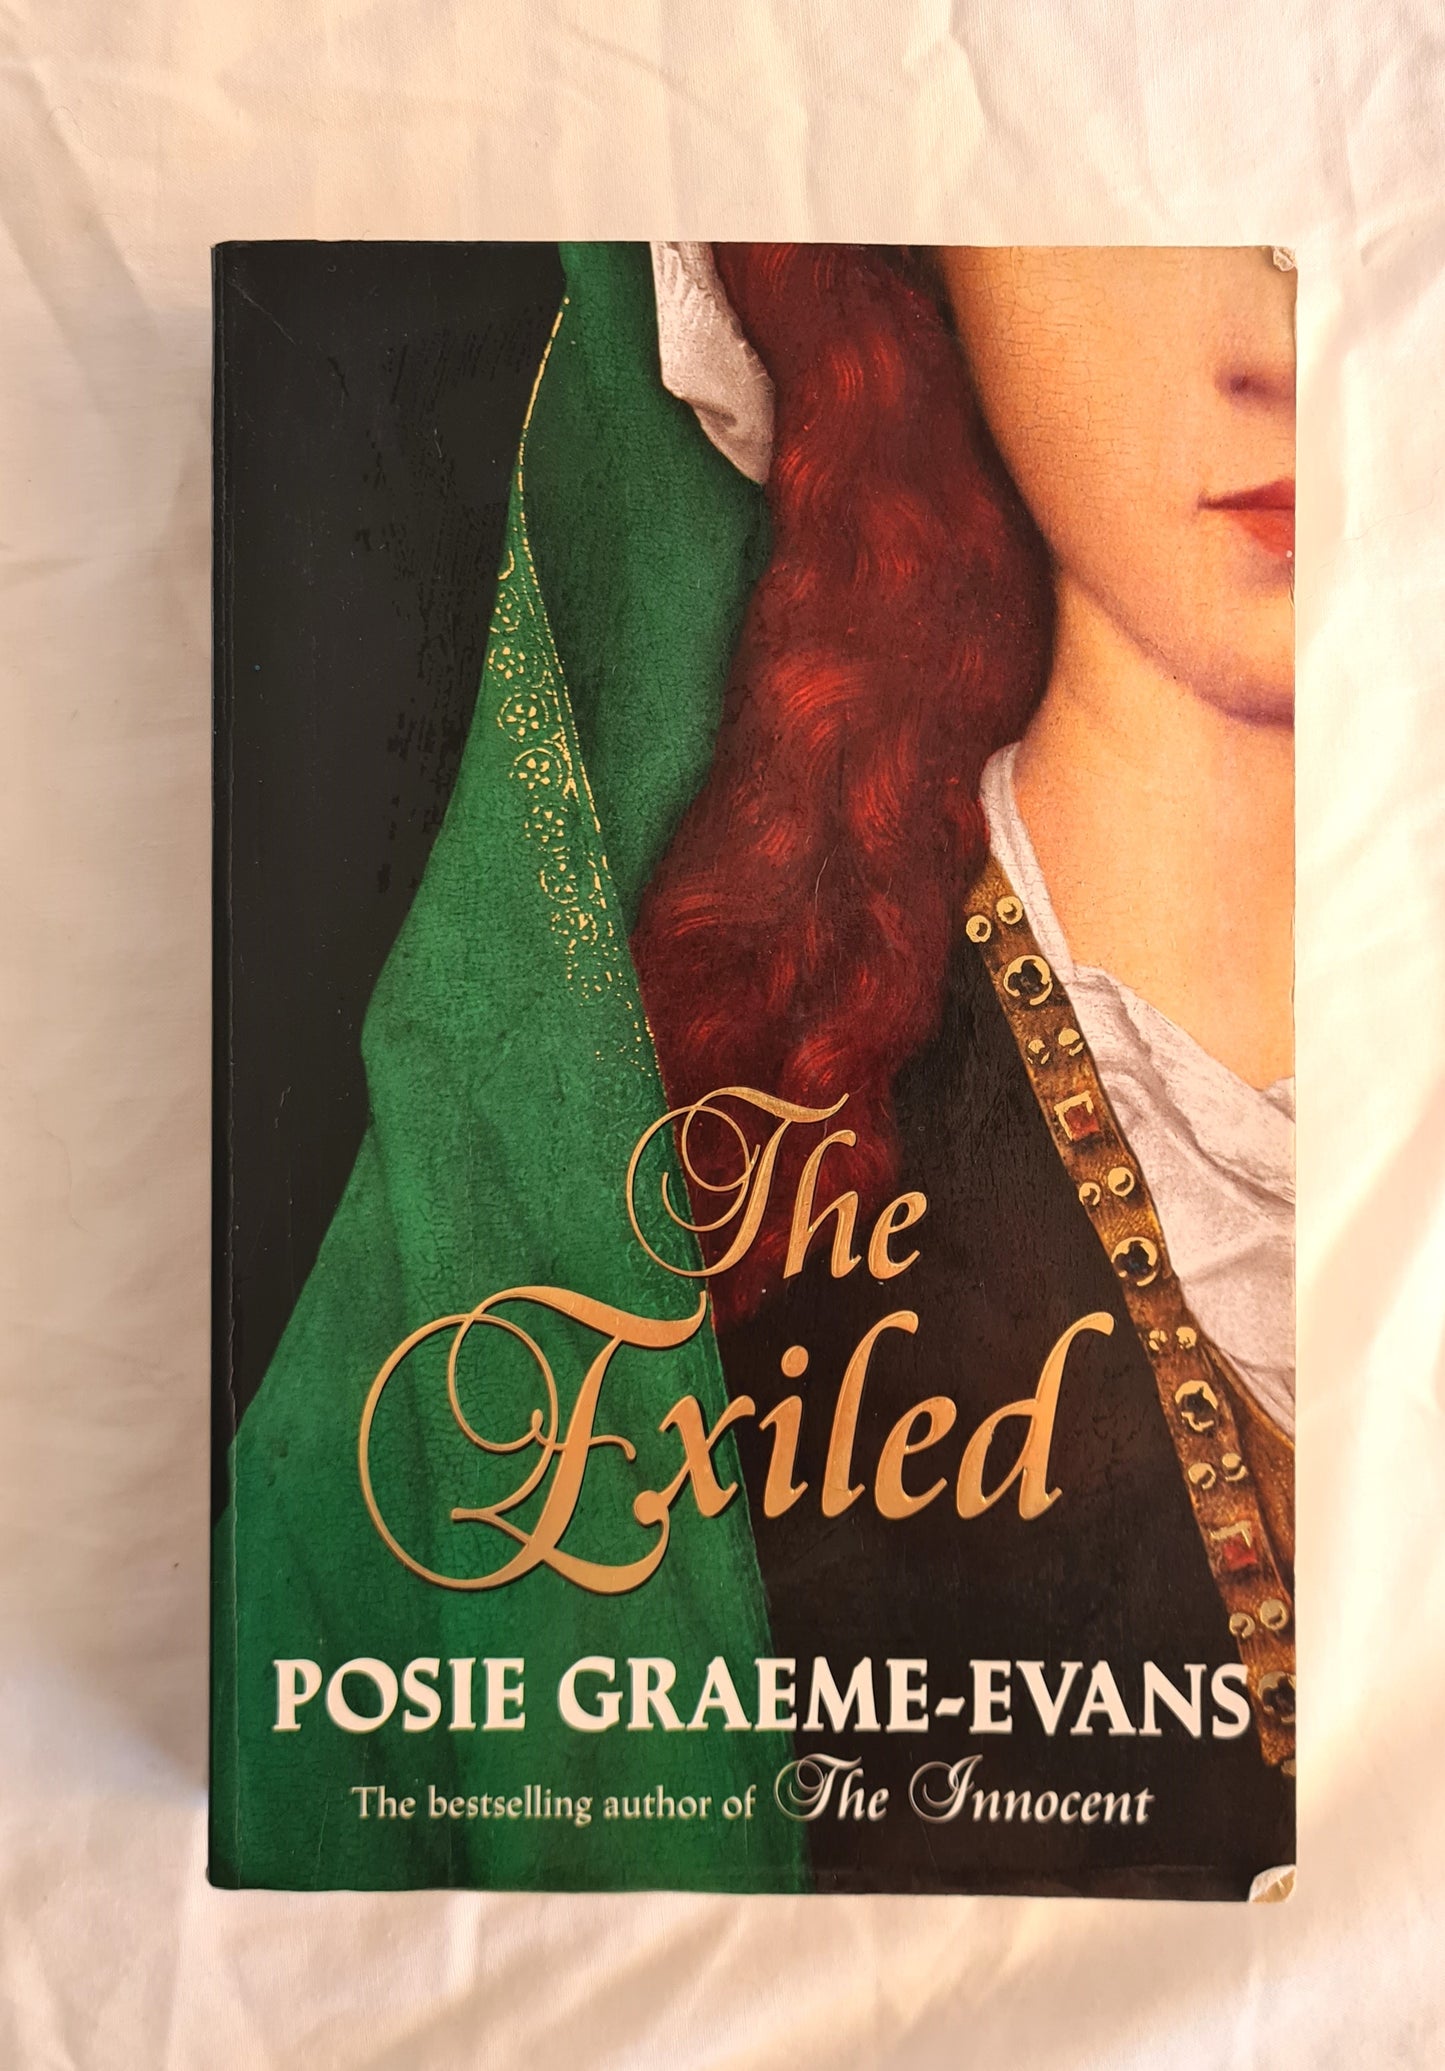 The Exiled  by Posie Graeme-Evans